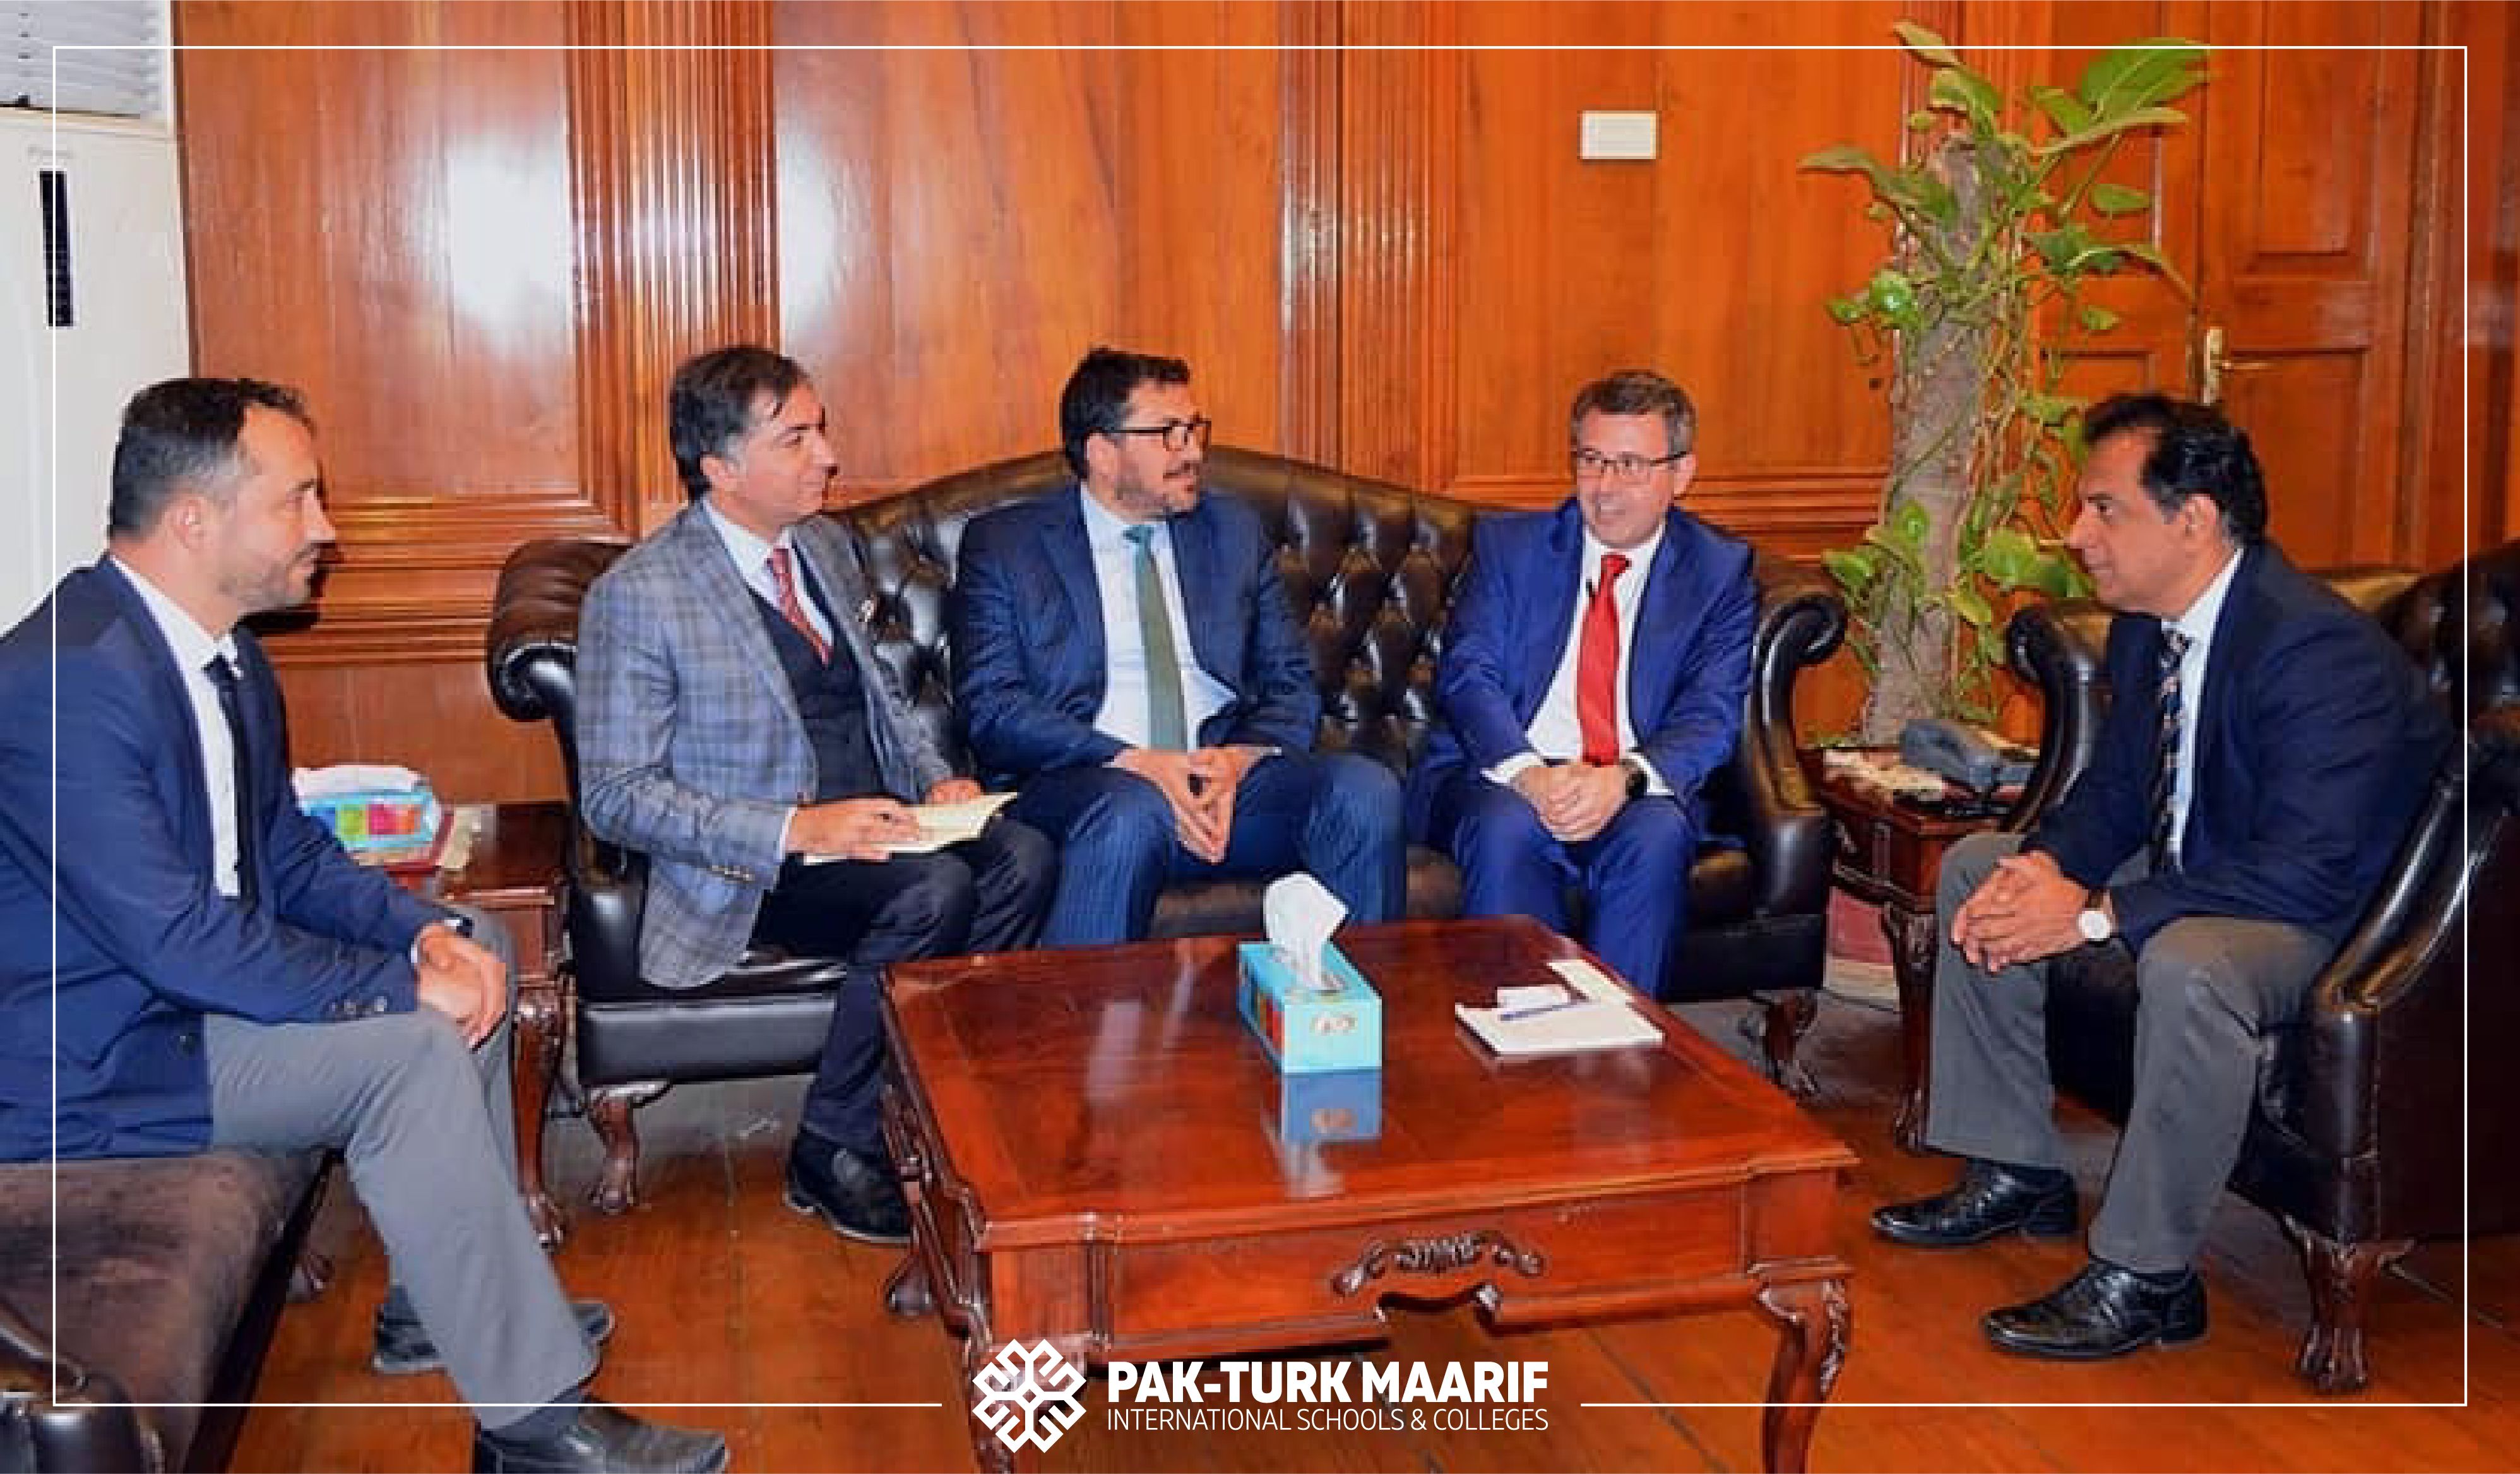 Country Director Turkish Maarif Foundation Mr. Harun met Commissioner Karachi and exchanged thoughts regarding uplifting the education system with mutual contribution.